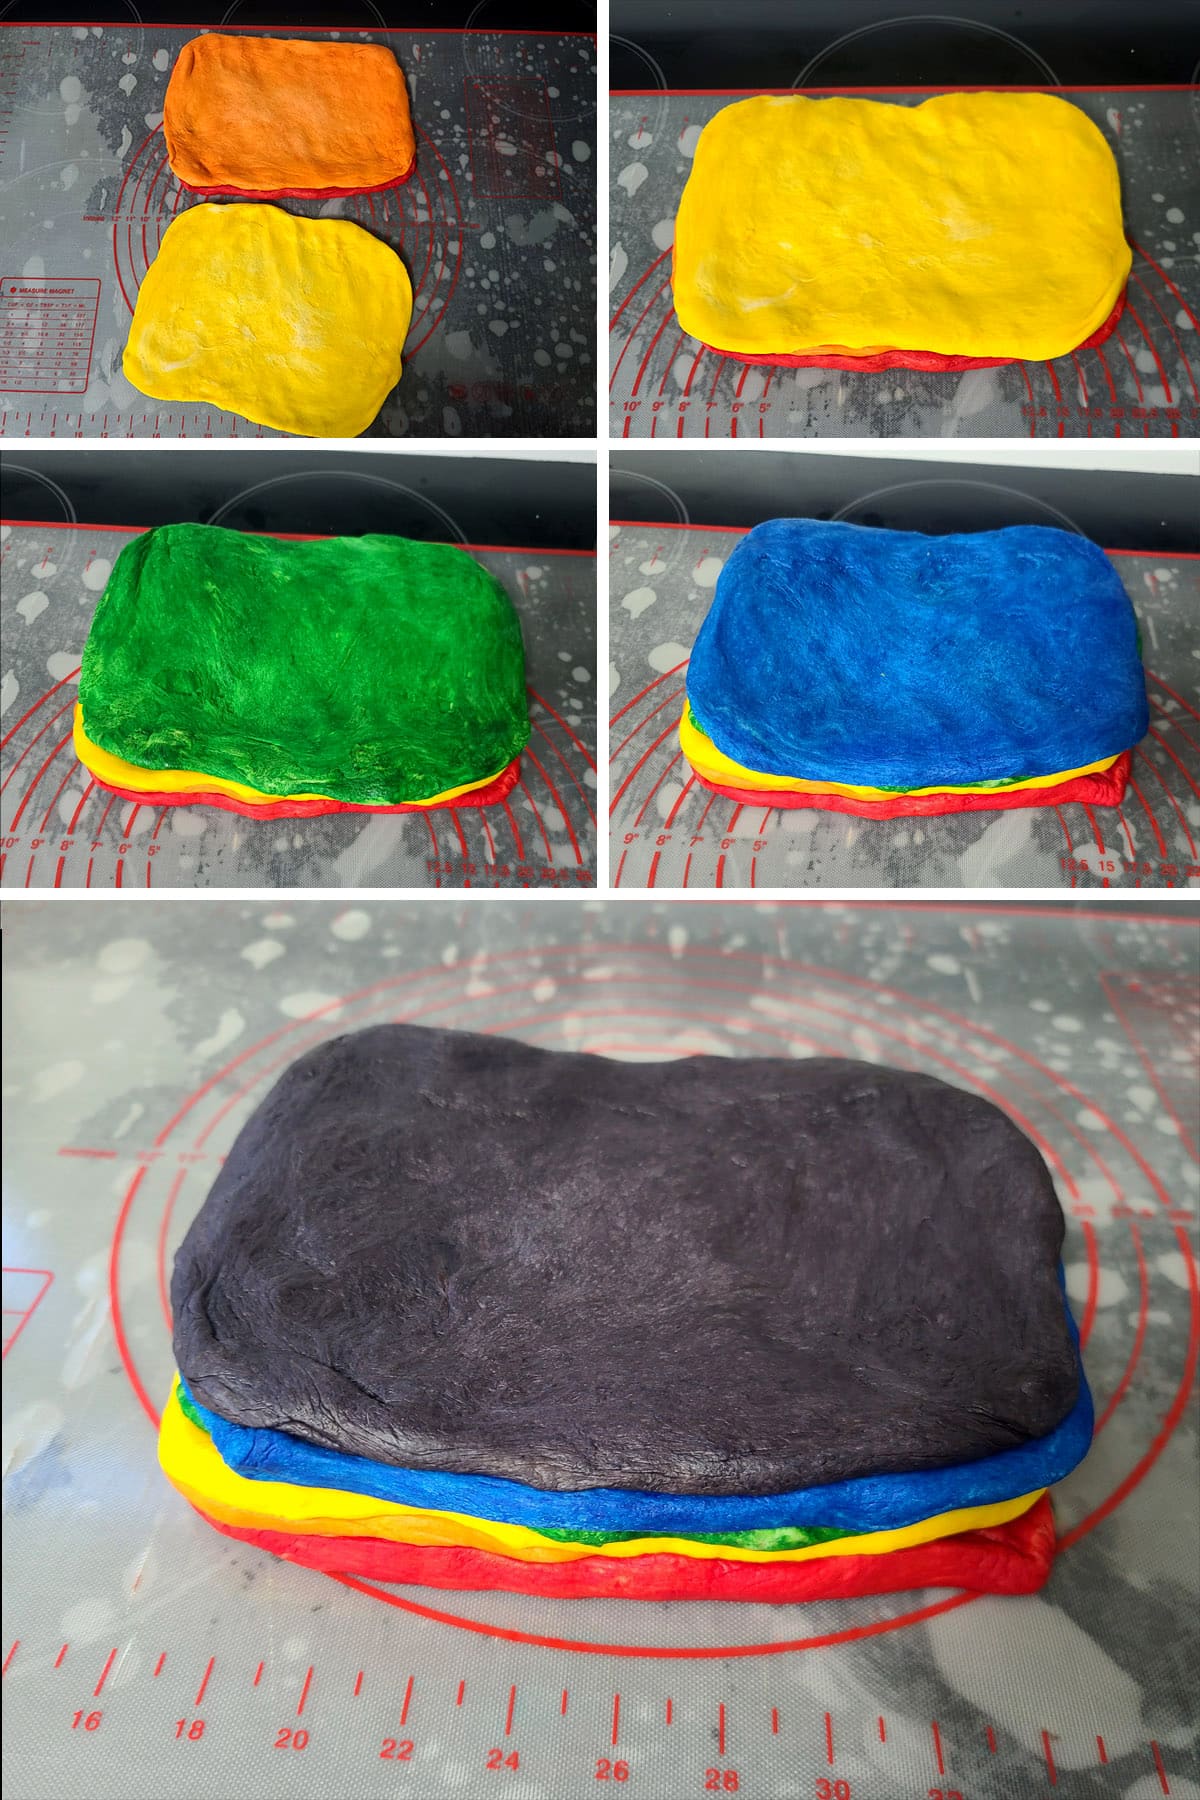 A 5 part image showing all of the doughs being pressed out and stacked in rainbow order, purple on top.